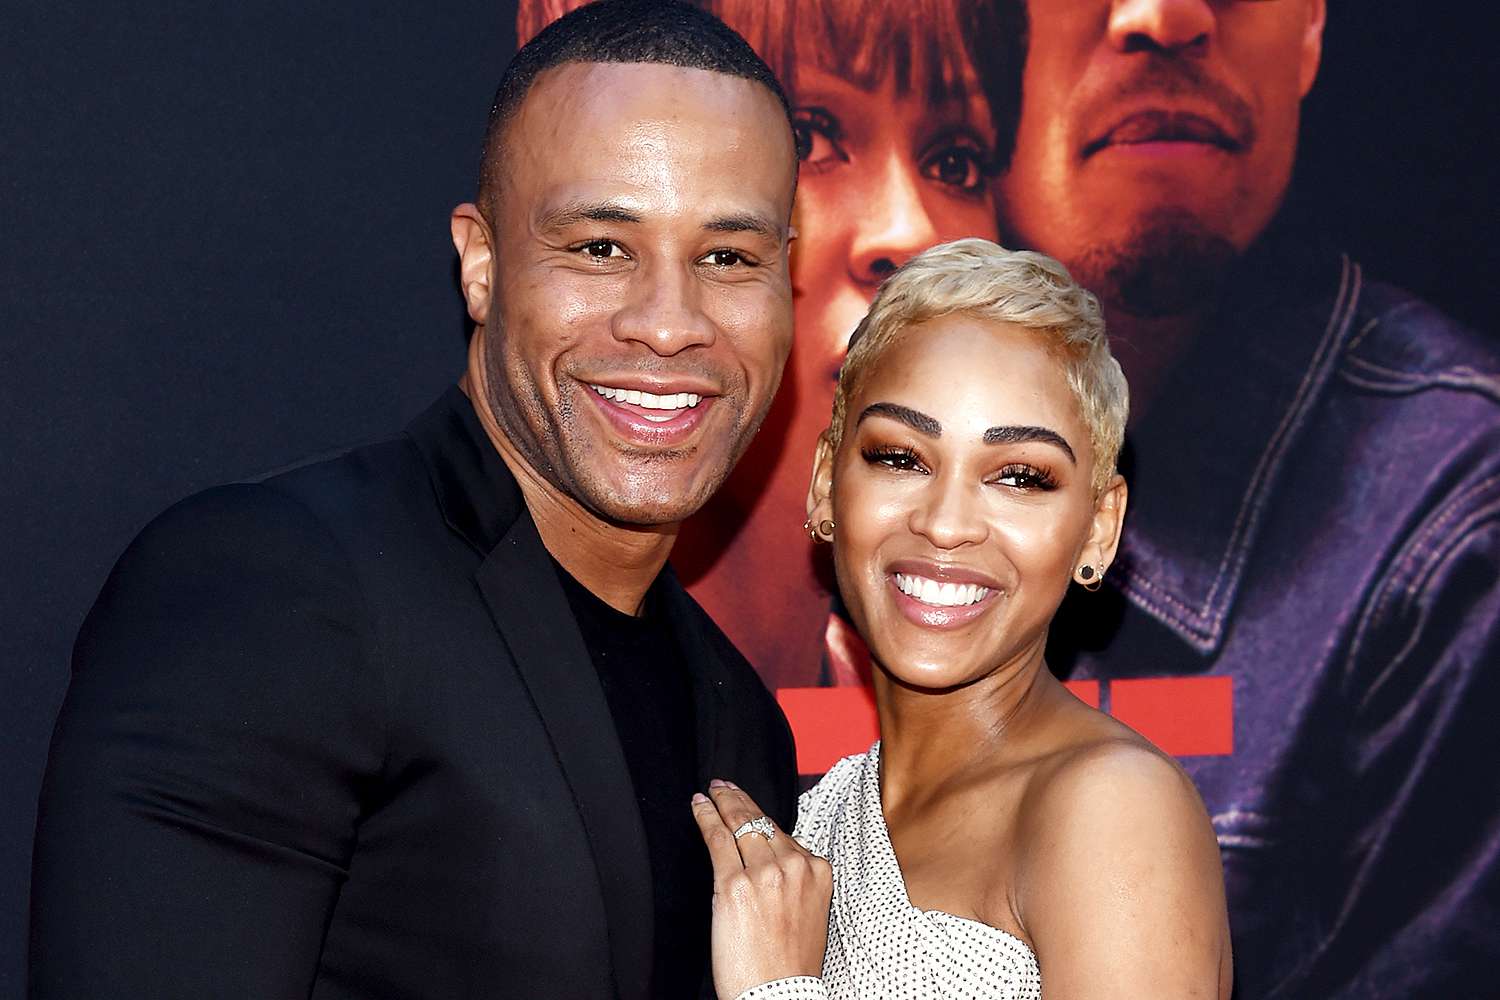 Meagan Good Says Ex DeVon Franklin Is a 'Wonderful Man' and She Doesn't Regret Their Marriage (Exclusive)